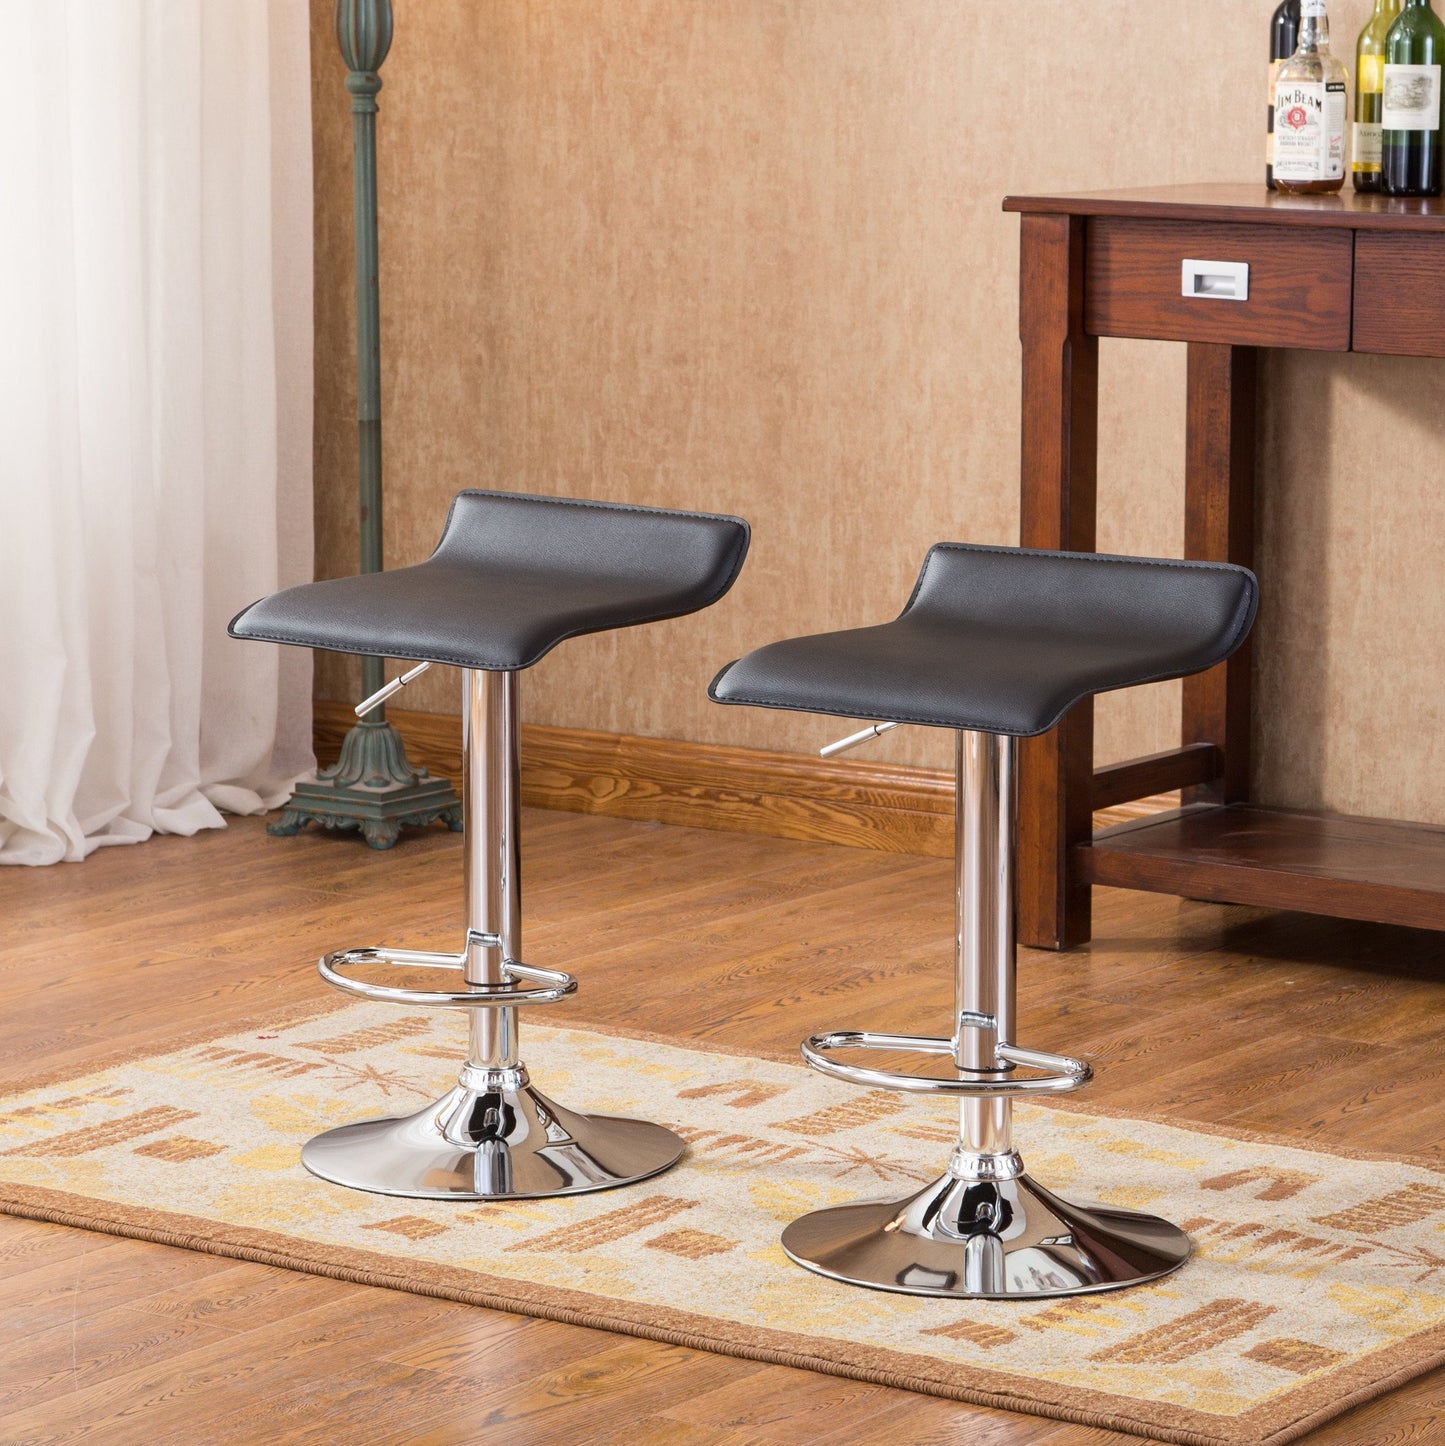 Contemporary Chrome Air Lift Adjustable Swivel Stools with Black Seat  Set of 2